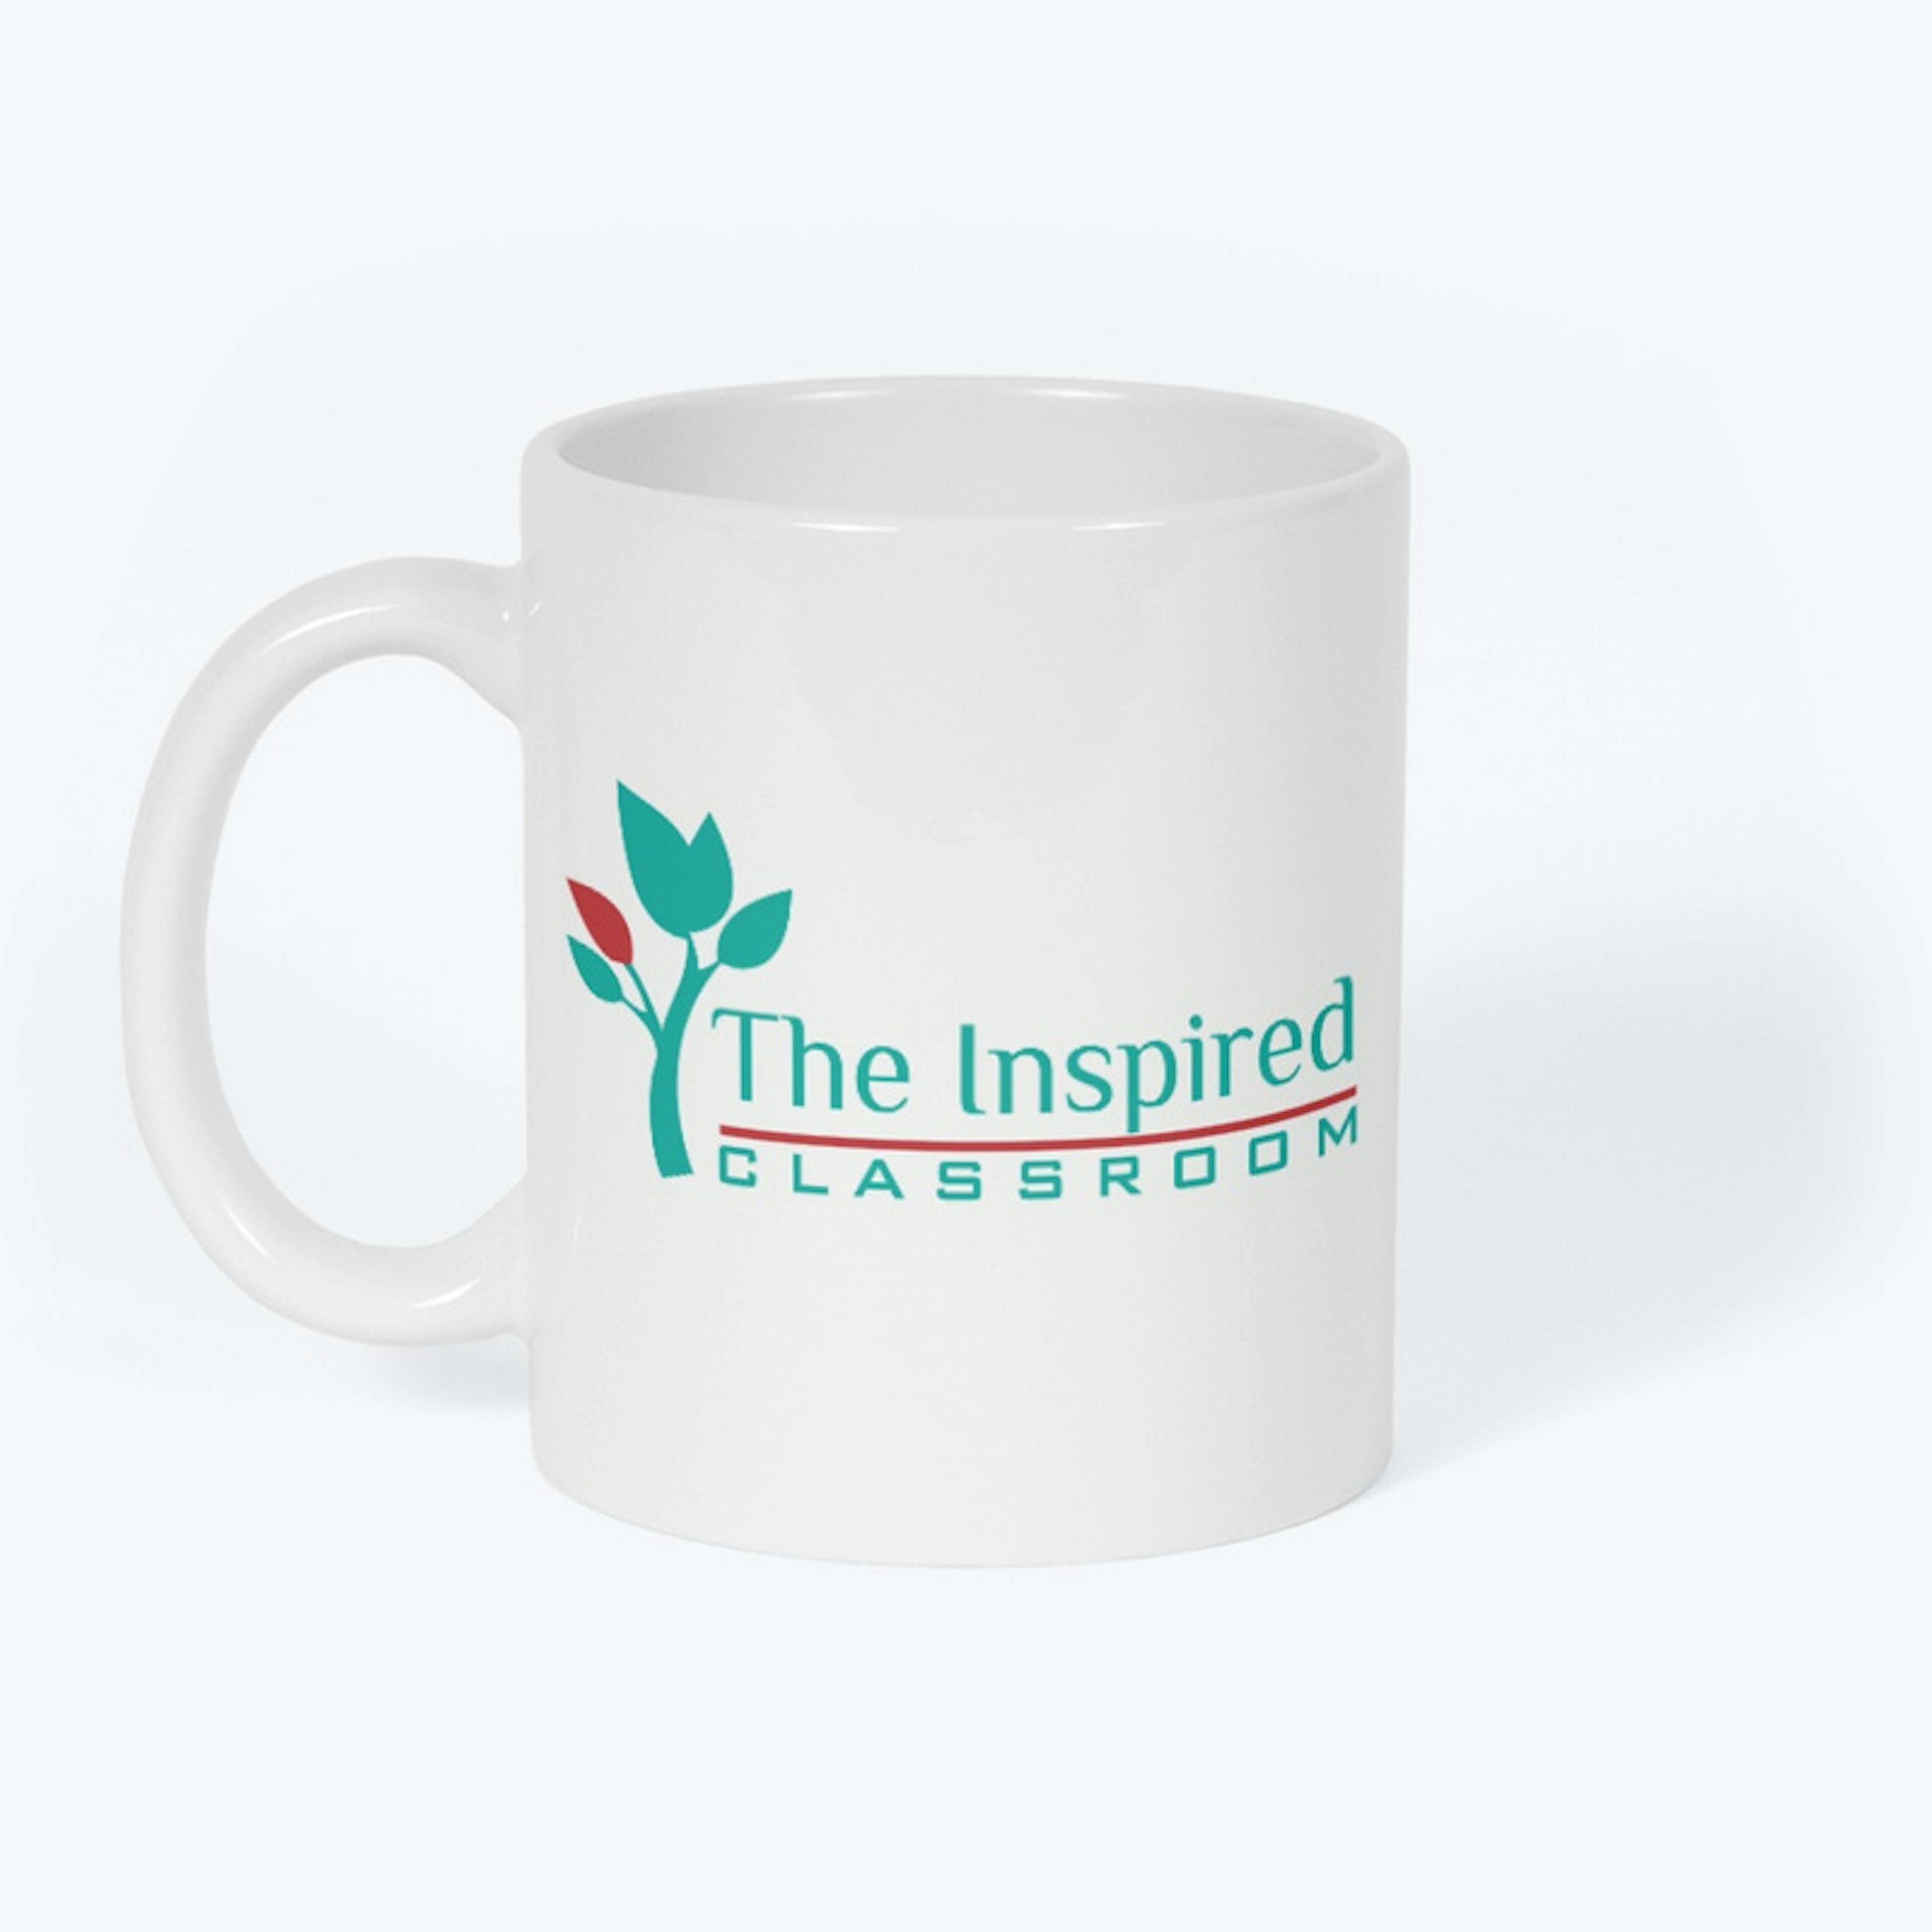 The Inspired Classroom - The Classic